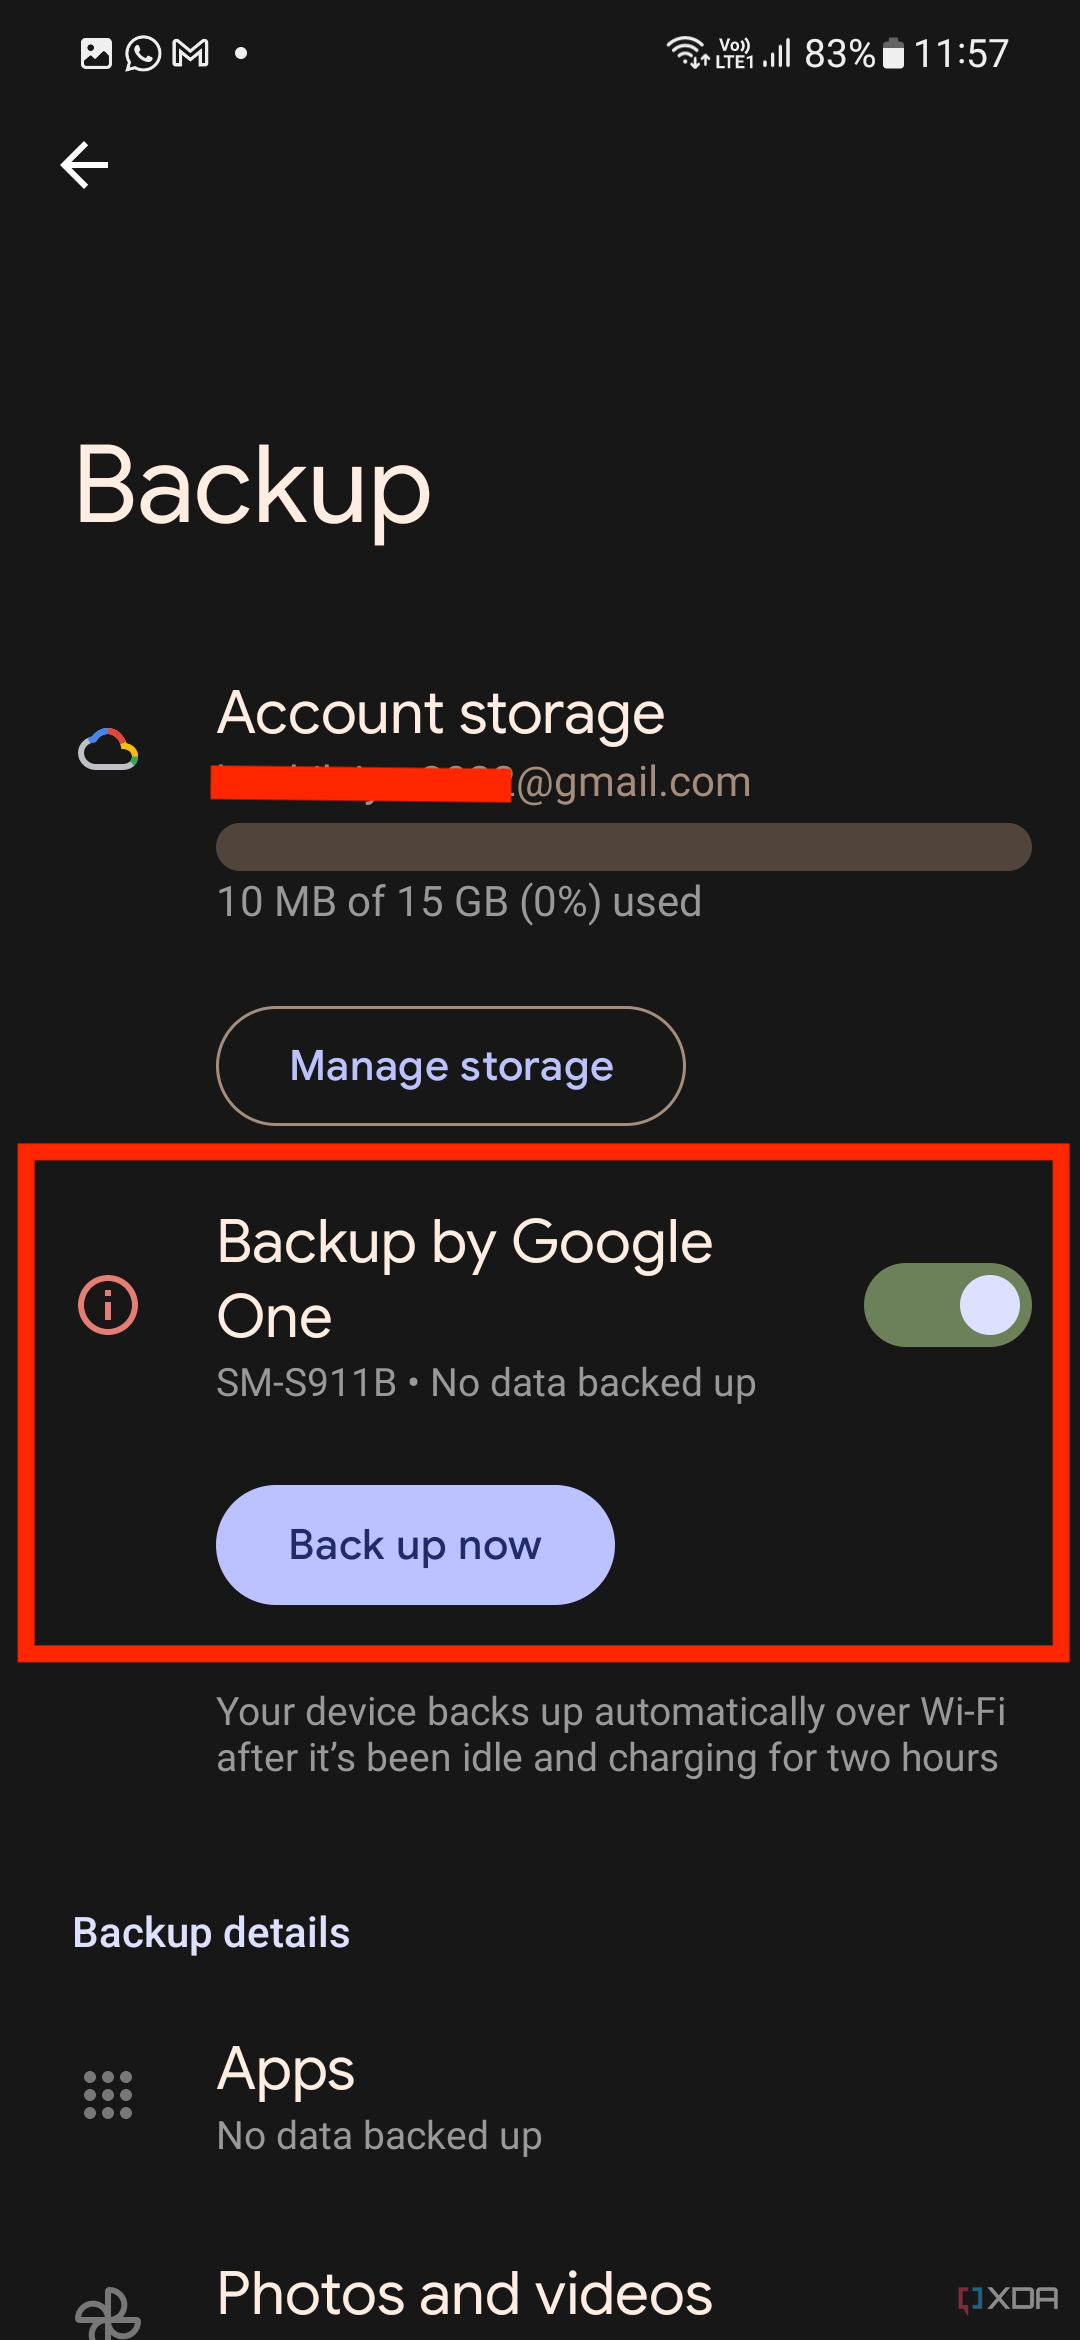 A screenshot showing the "Back up now" button in Google One.